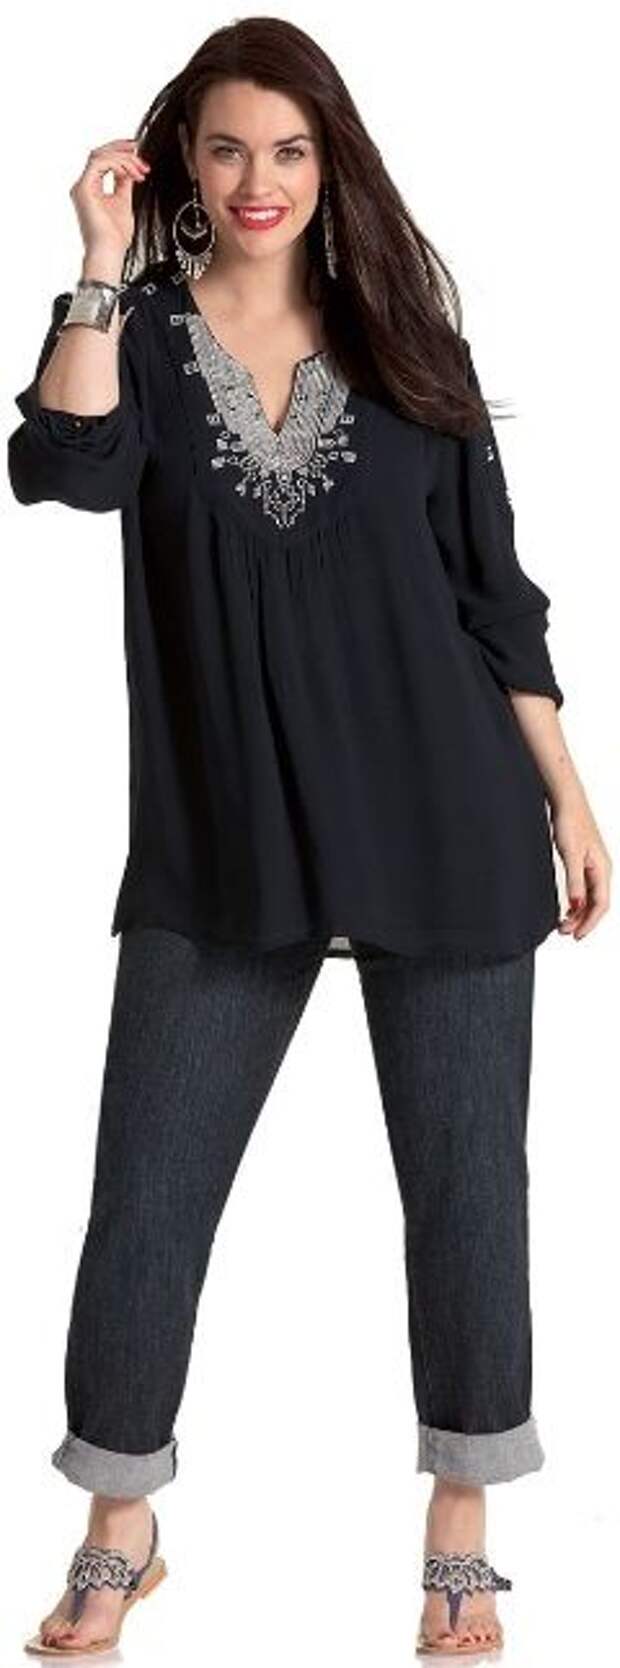 MONSOON ROMANTIC TOP - Long Sleeved - My Size, Plus Sized Women’s Fashion & Clothing.....love this whole outfit!  Love the top!!